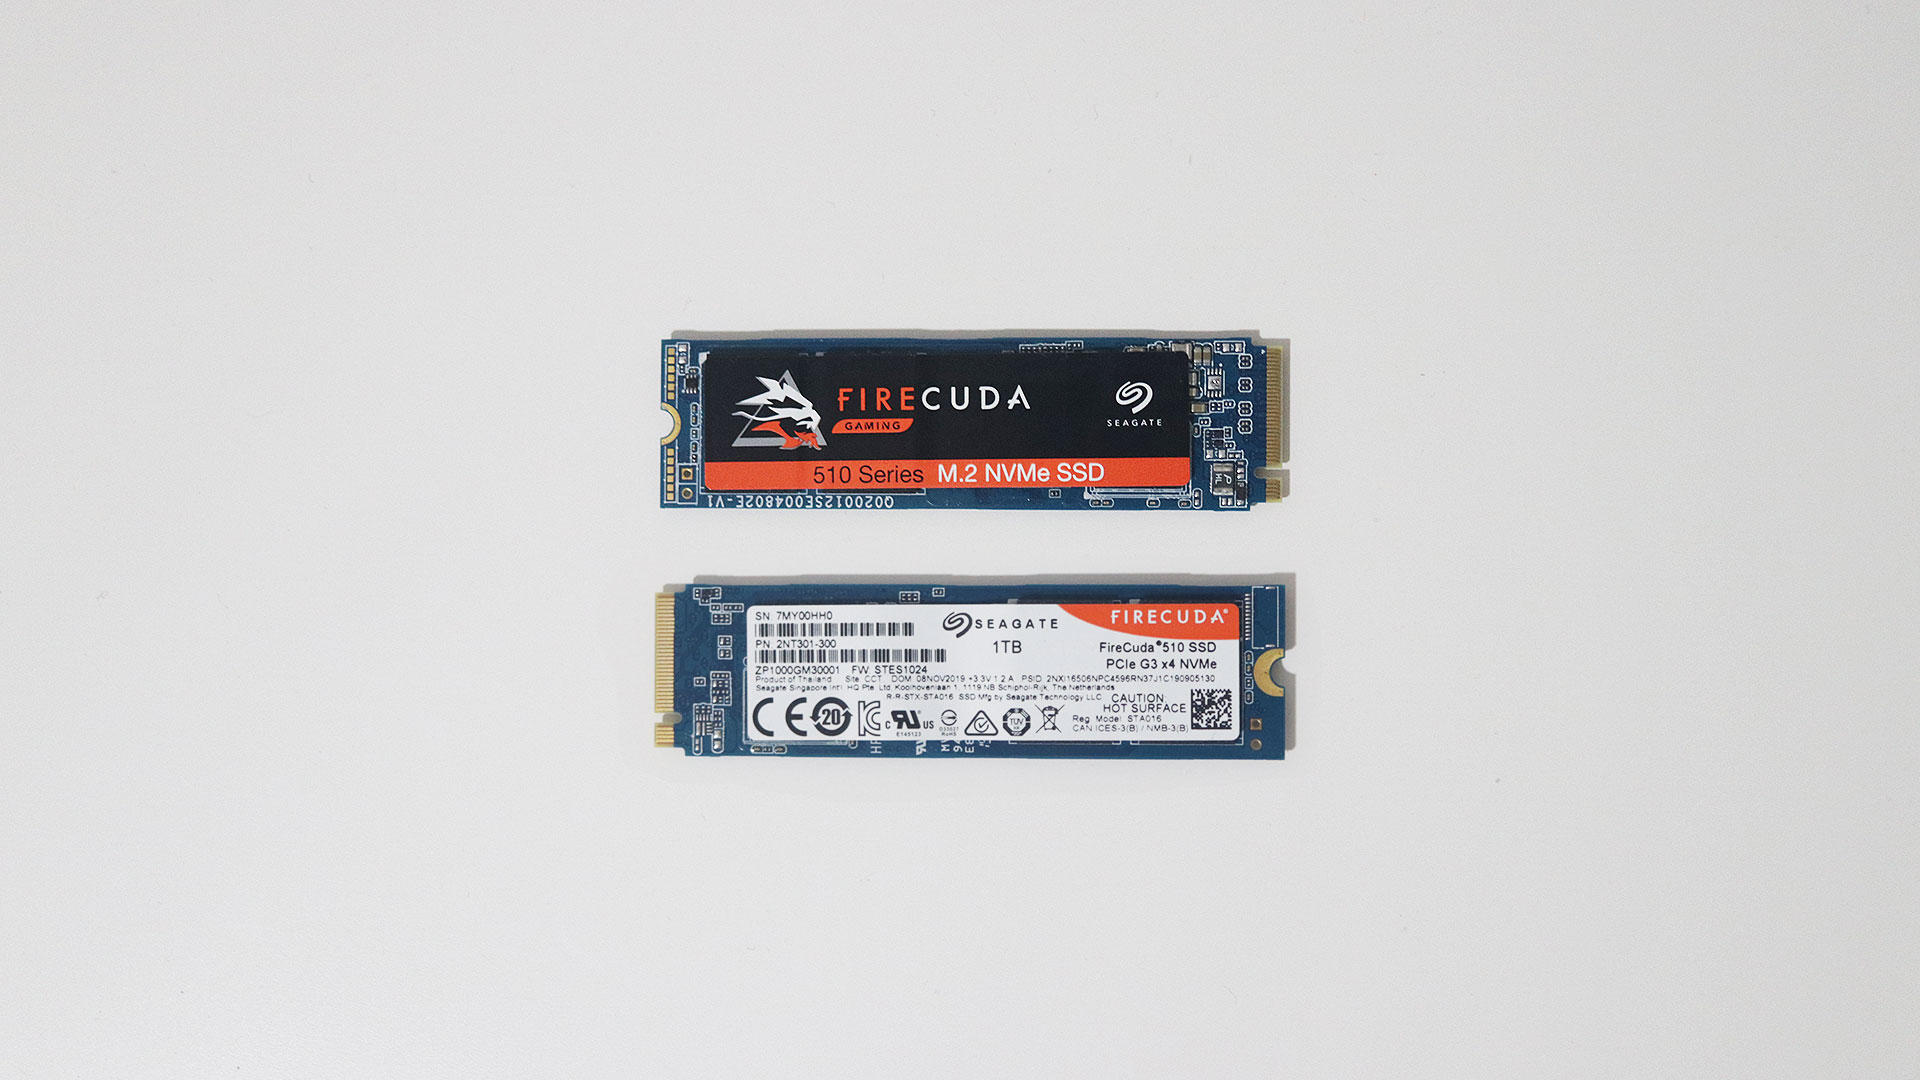 Seagate FireCuda 510 SSD Review 